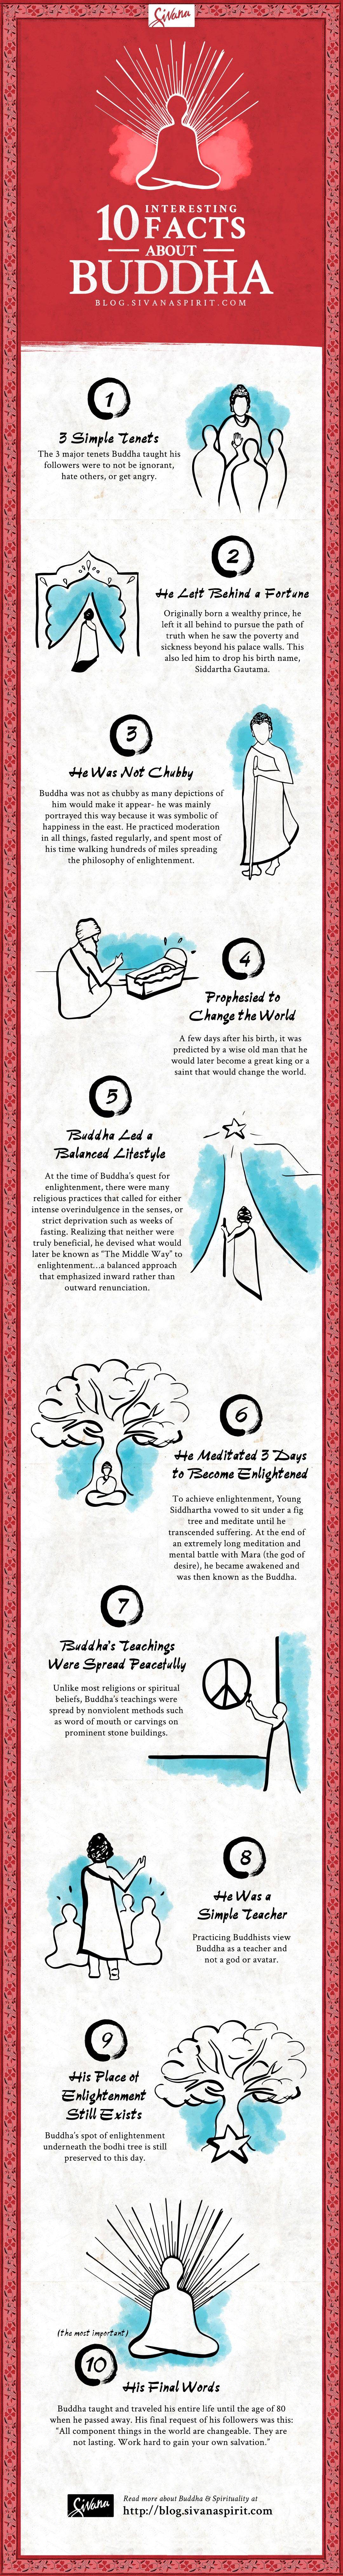 10 Interesting Facts About Buddha Infographic